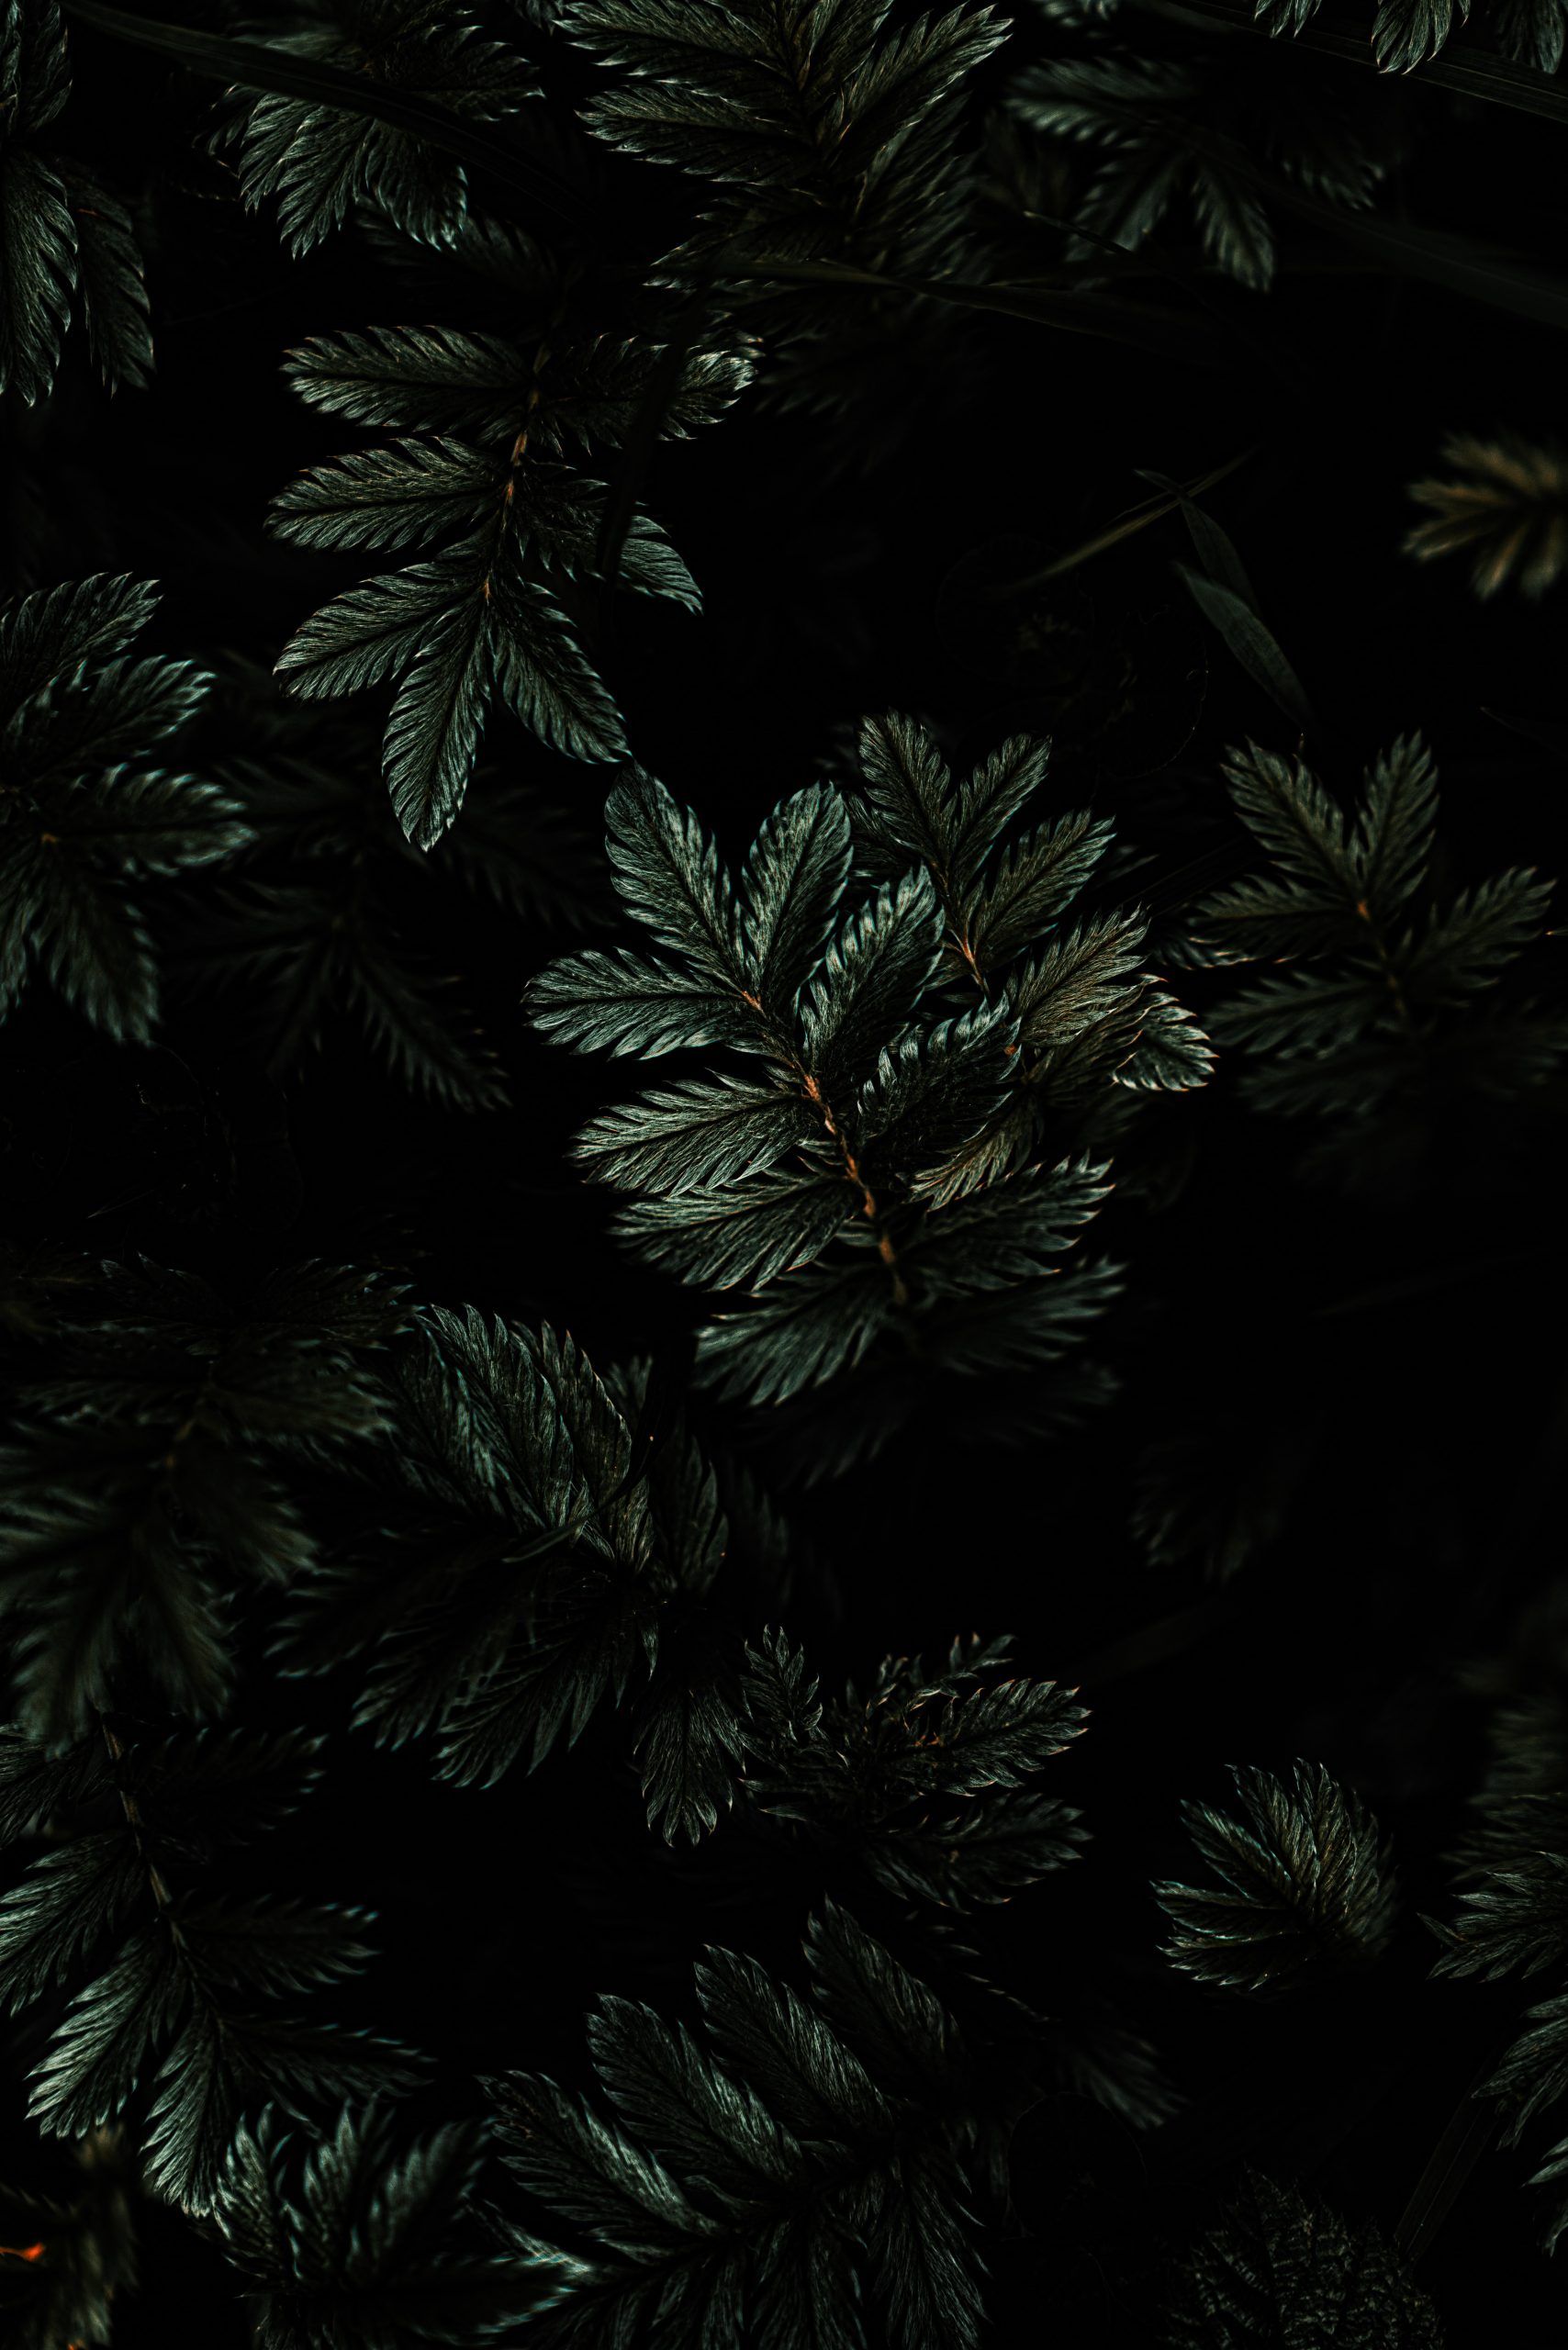 A close up of green leaves on a black background - Dark